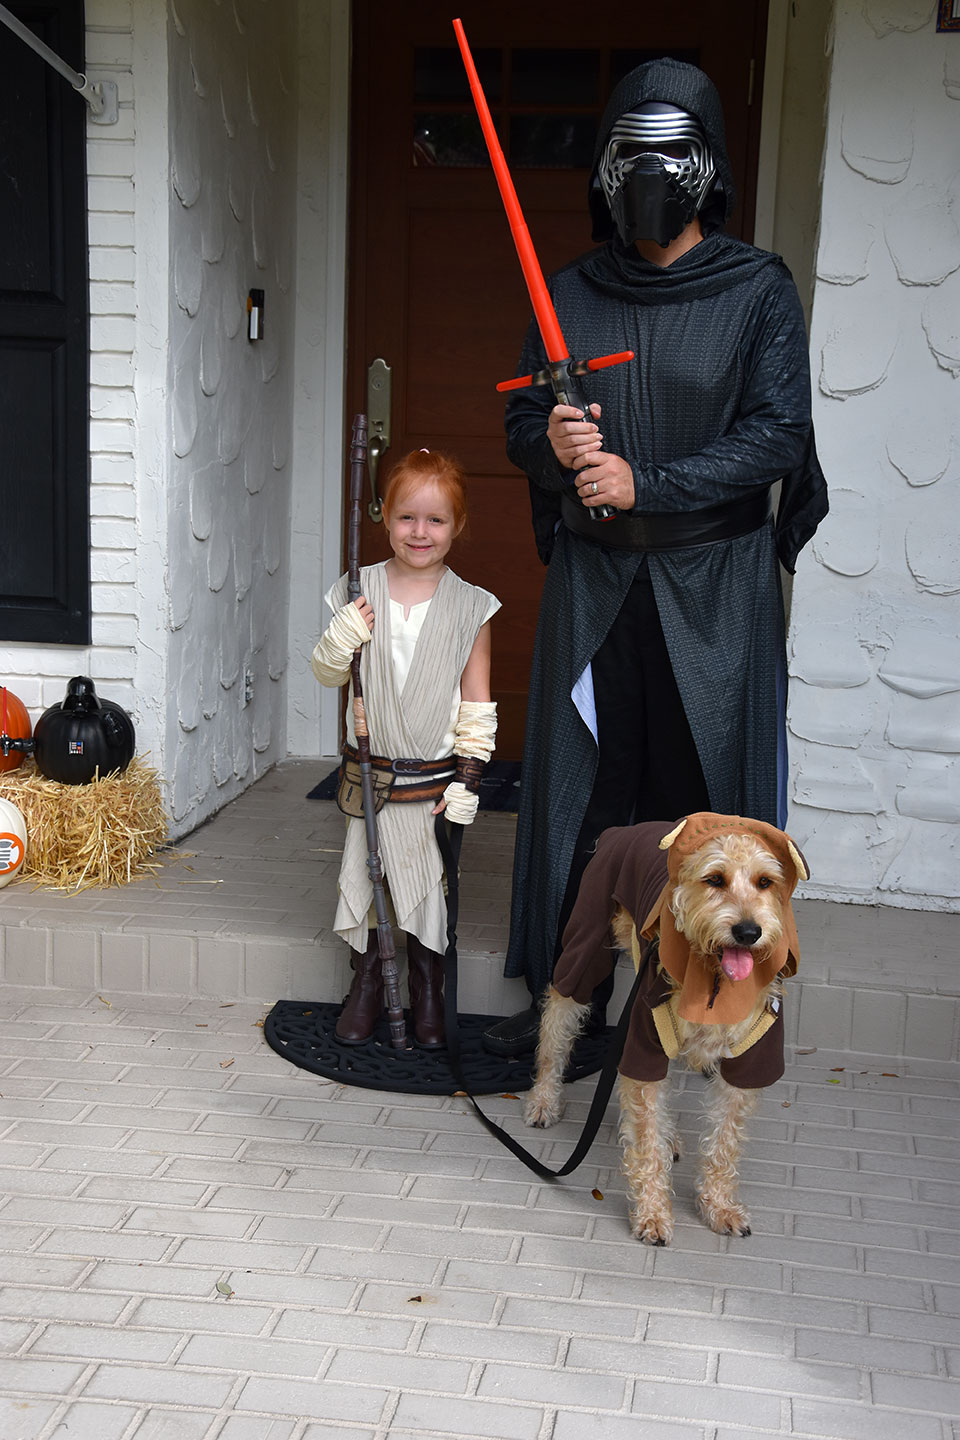 Halloween costumes for families